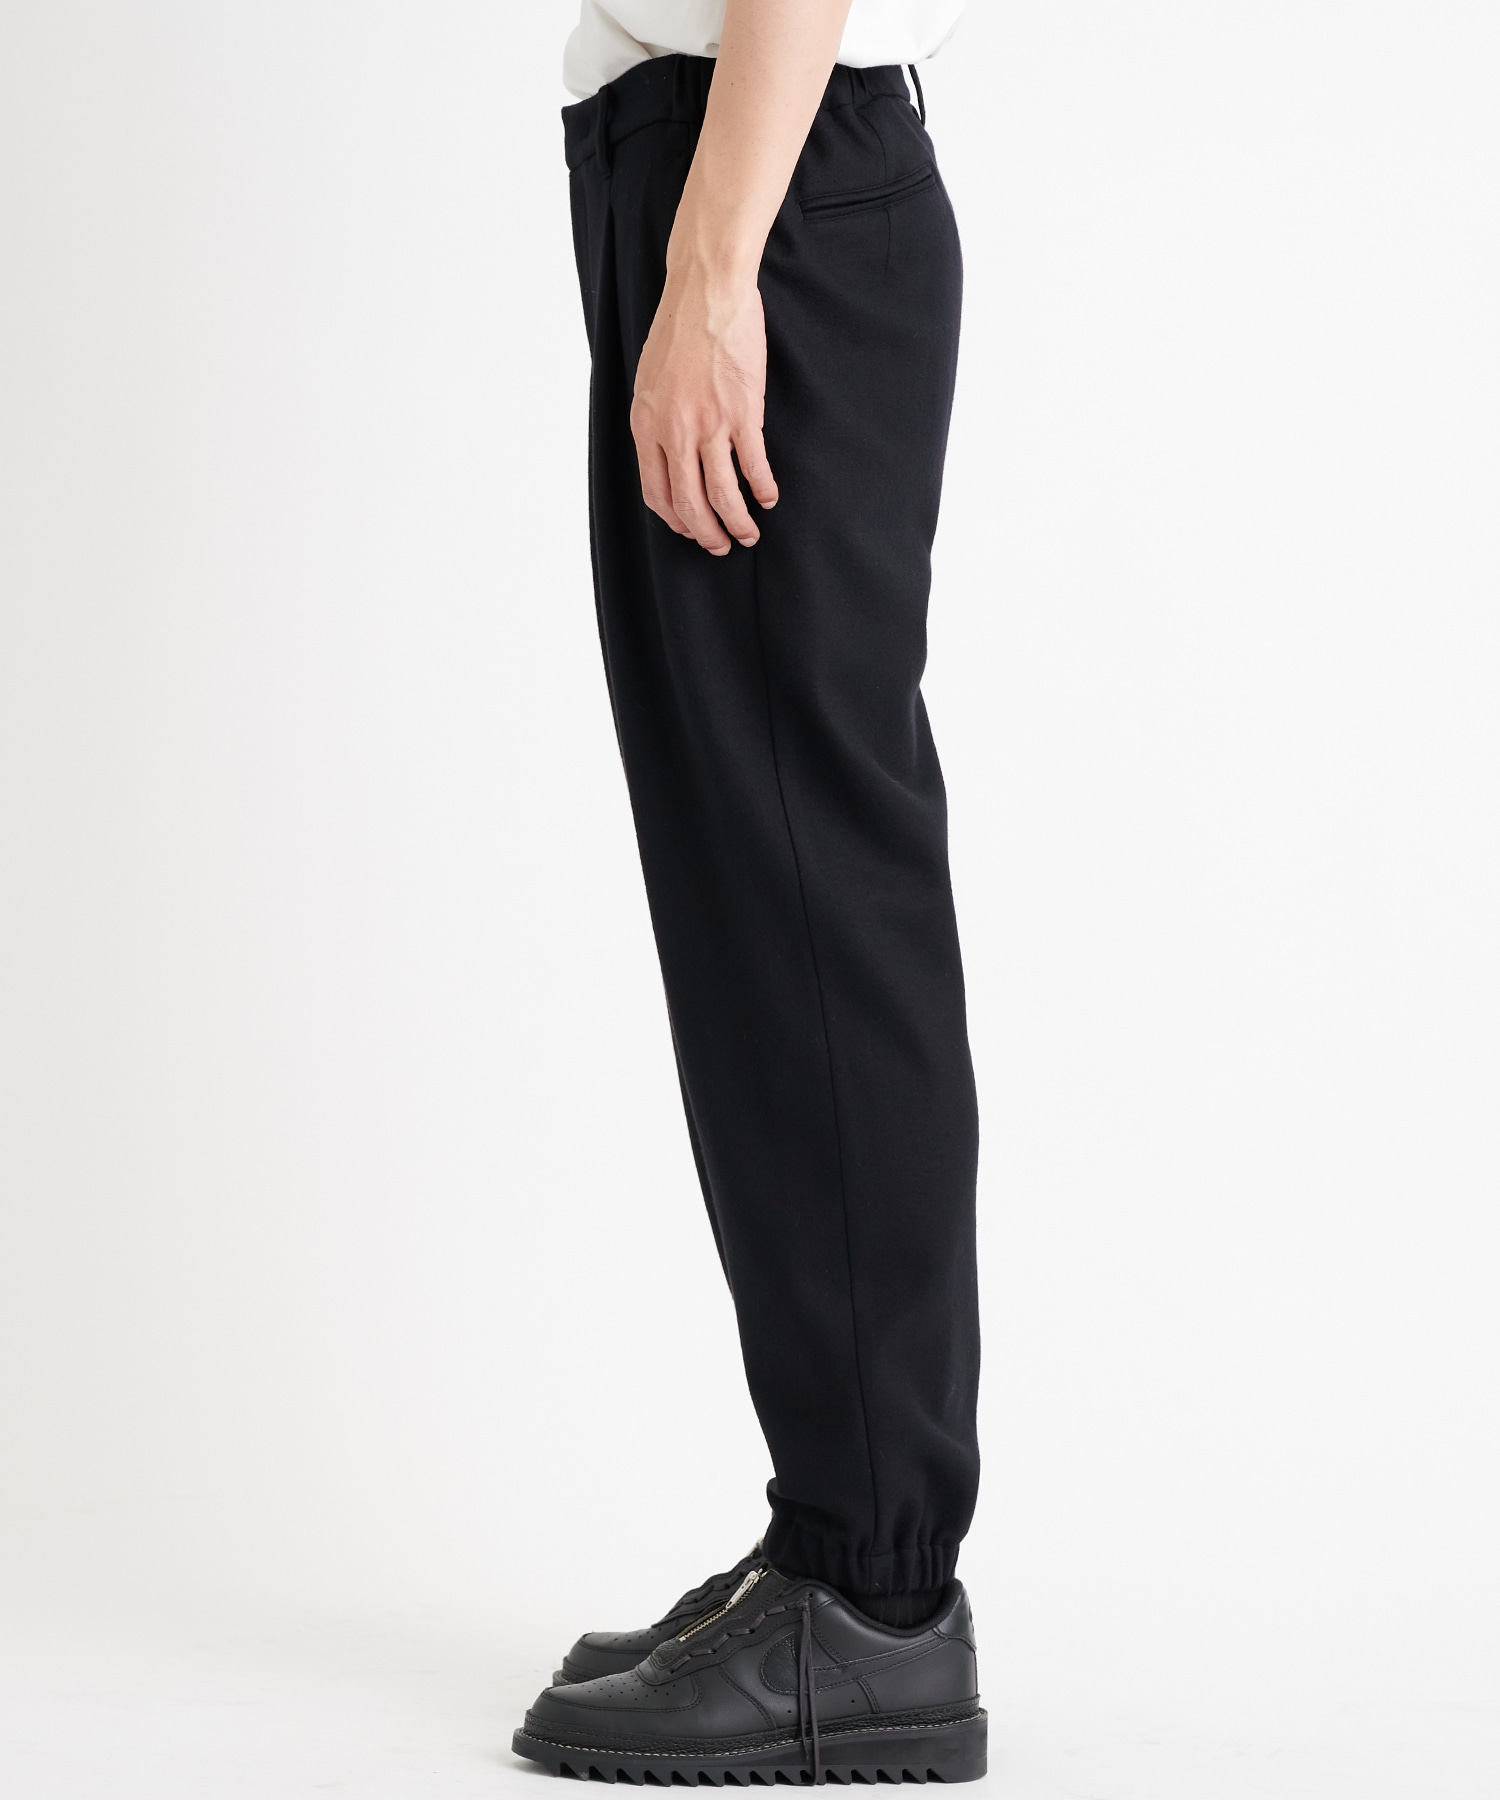 Flanne Lana Cashmere Touch Easy Pants | THE TOKYO